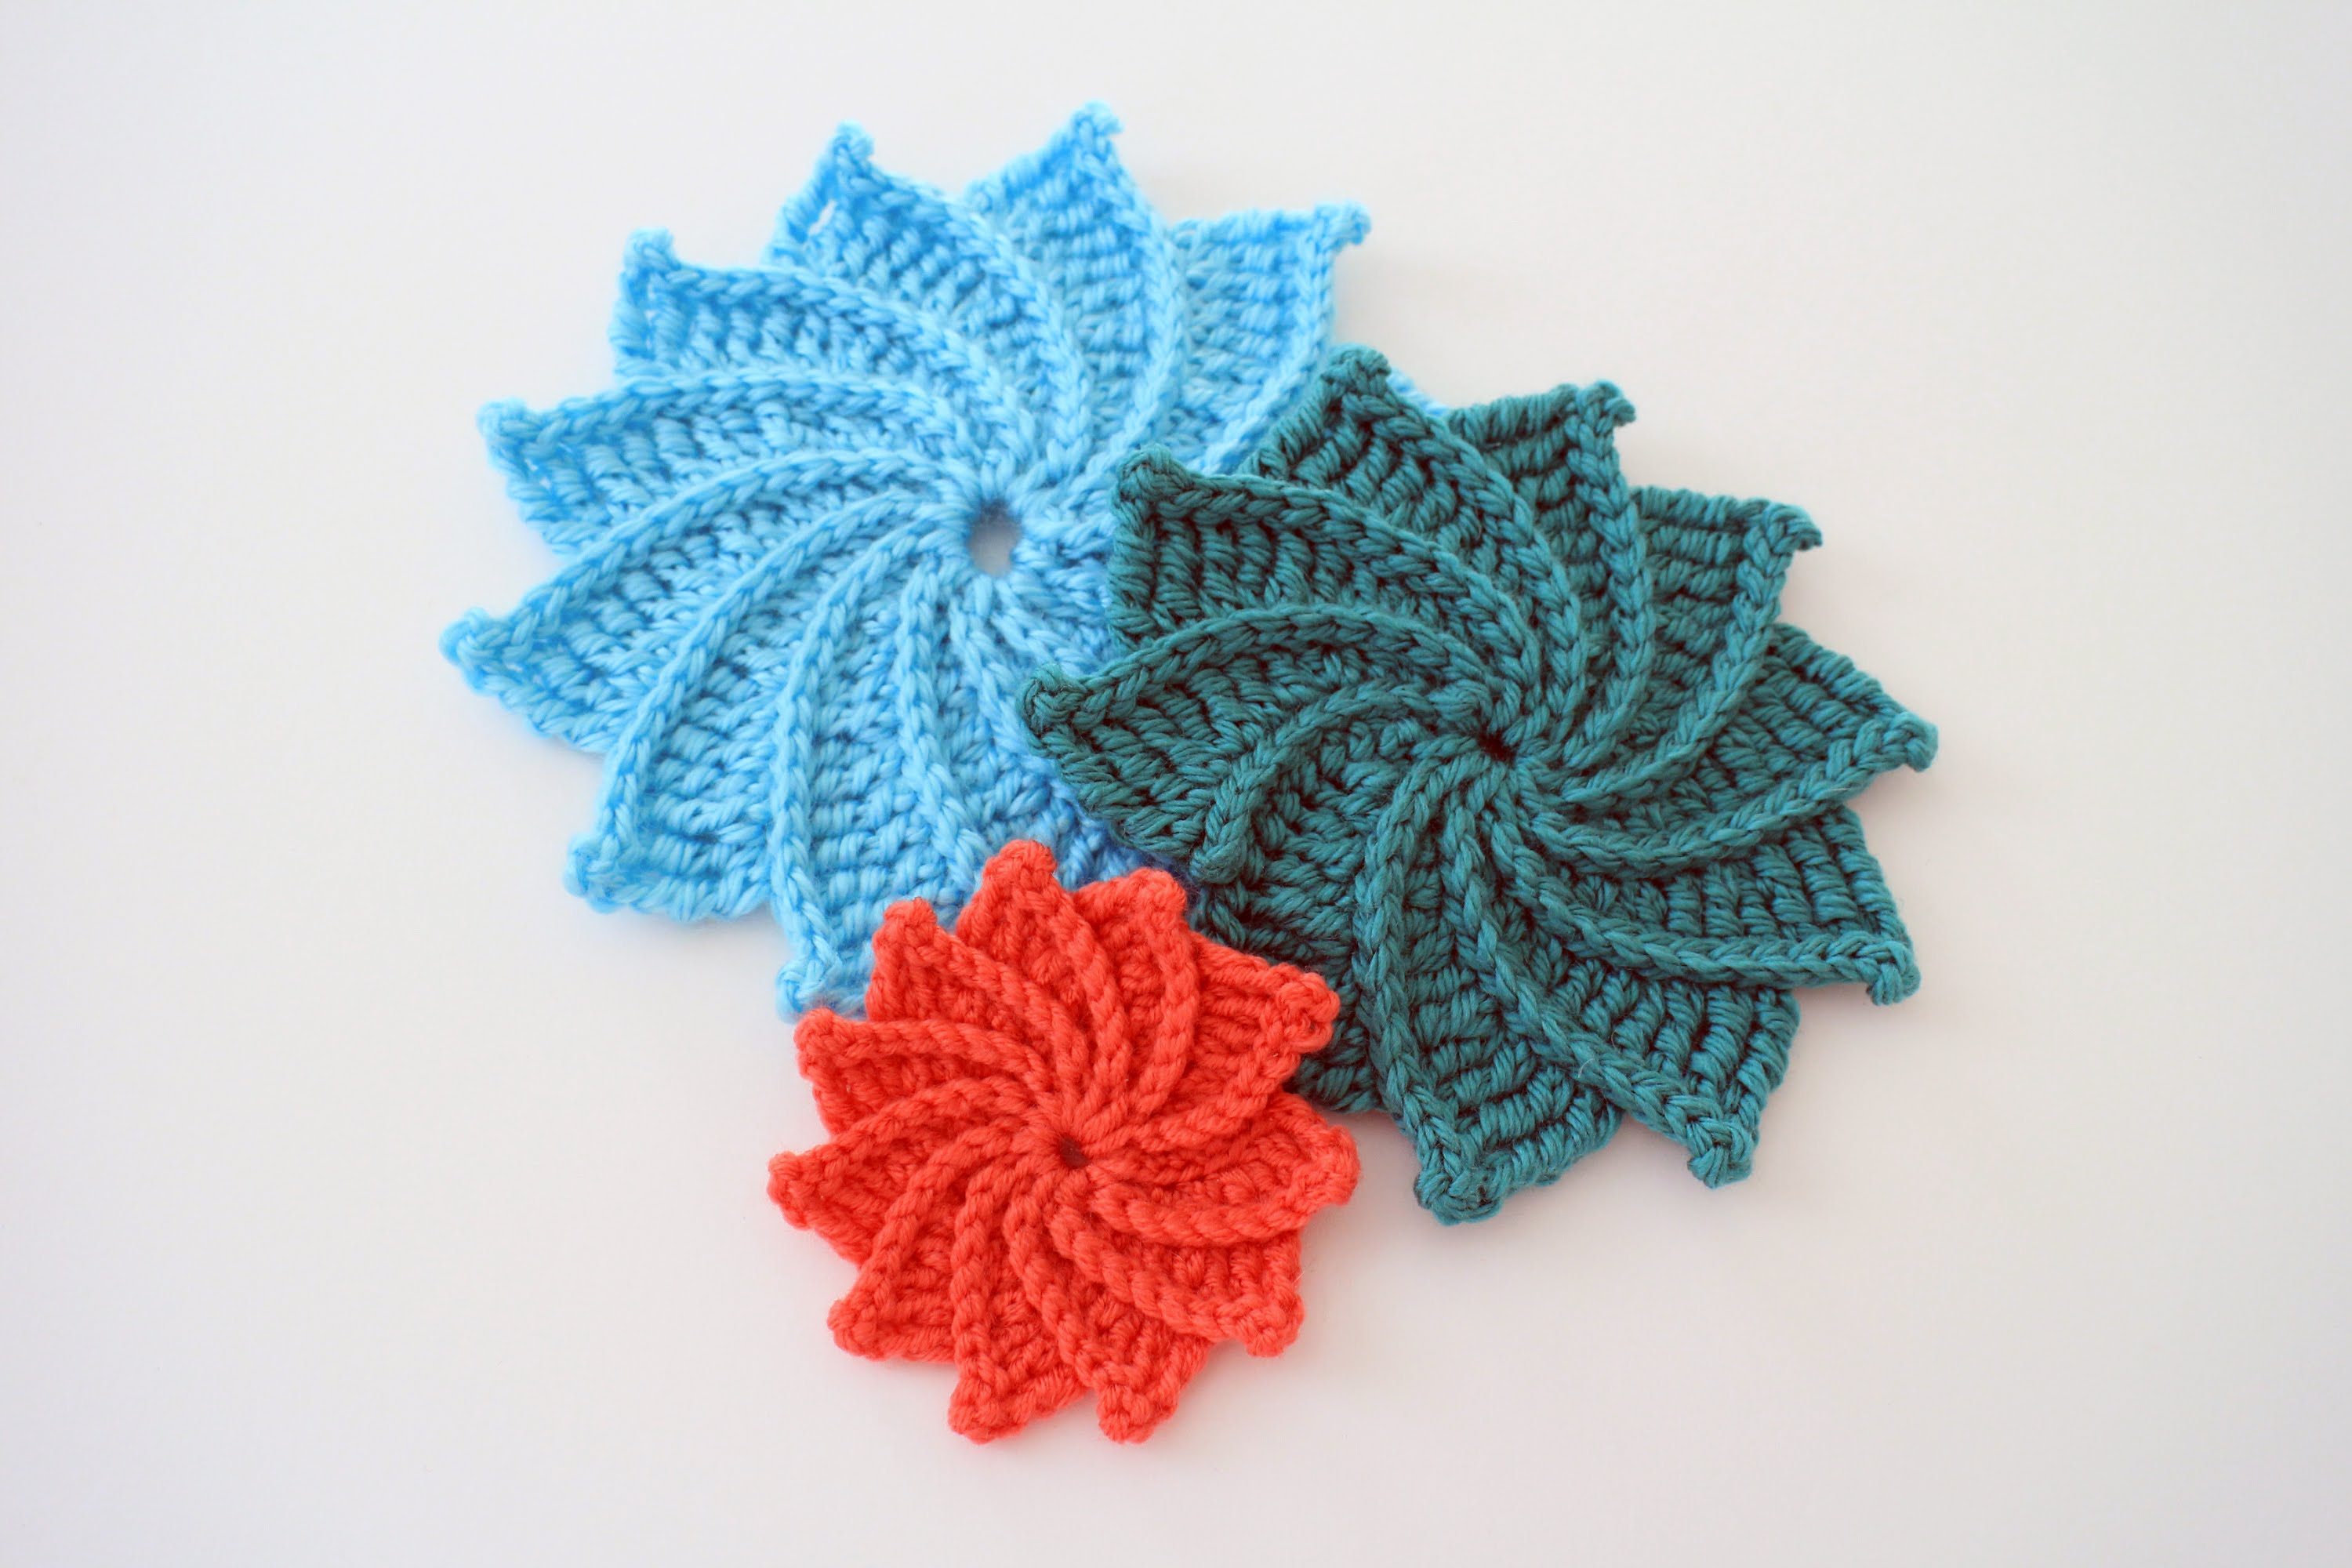 Hooked On Crochet Free Patterns How To Crochet The Spiral Crochet Flower Video Tutorial And Written